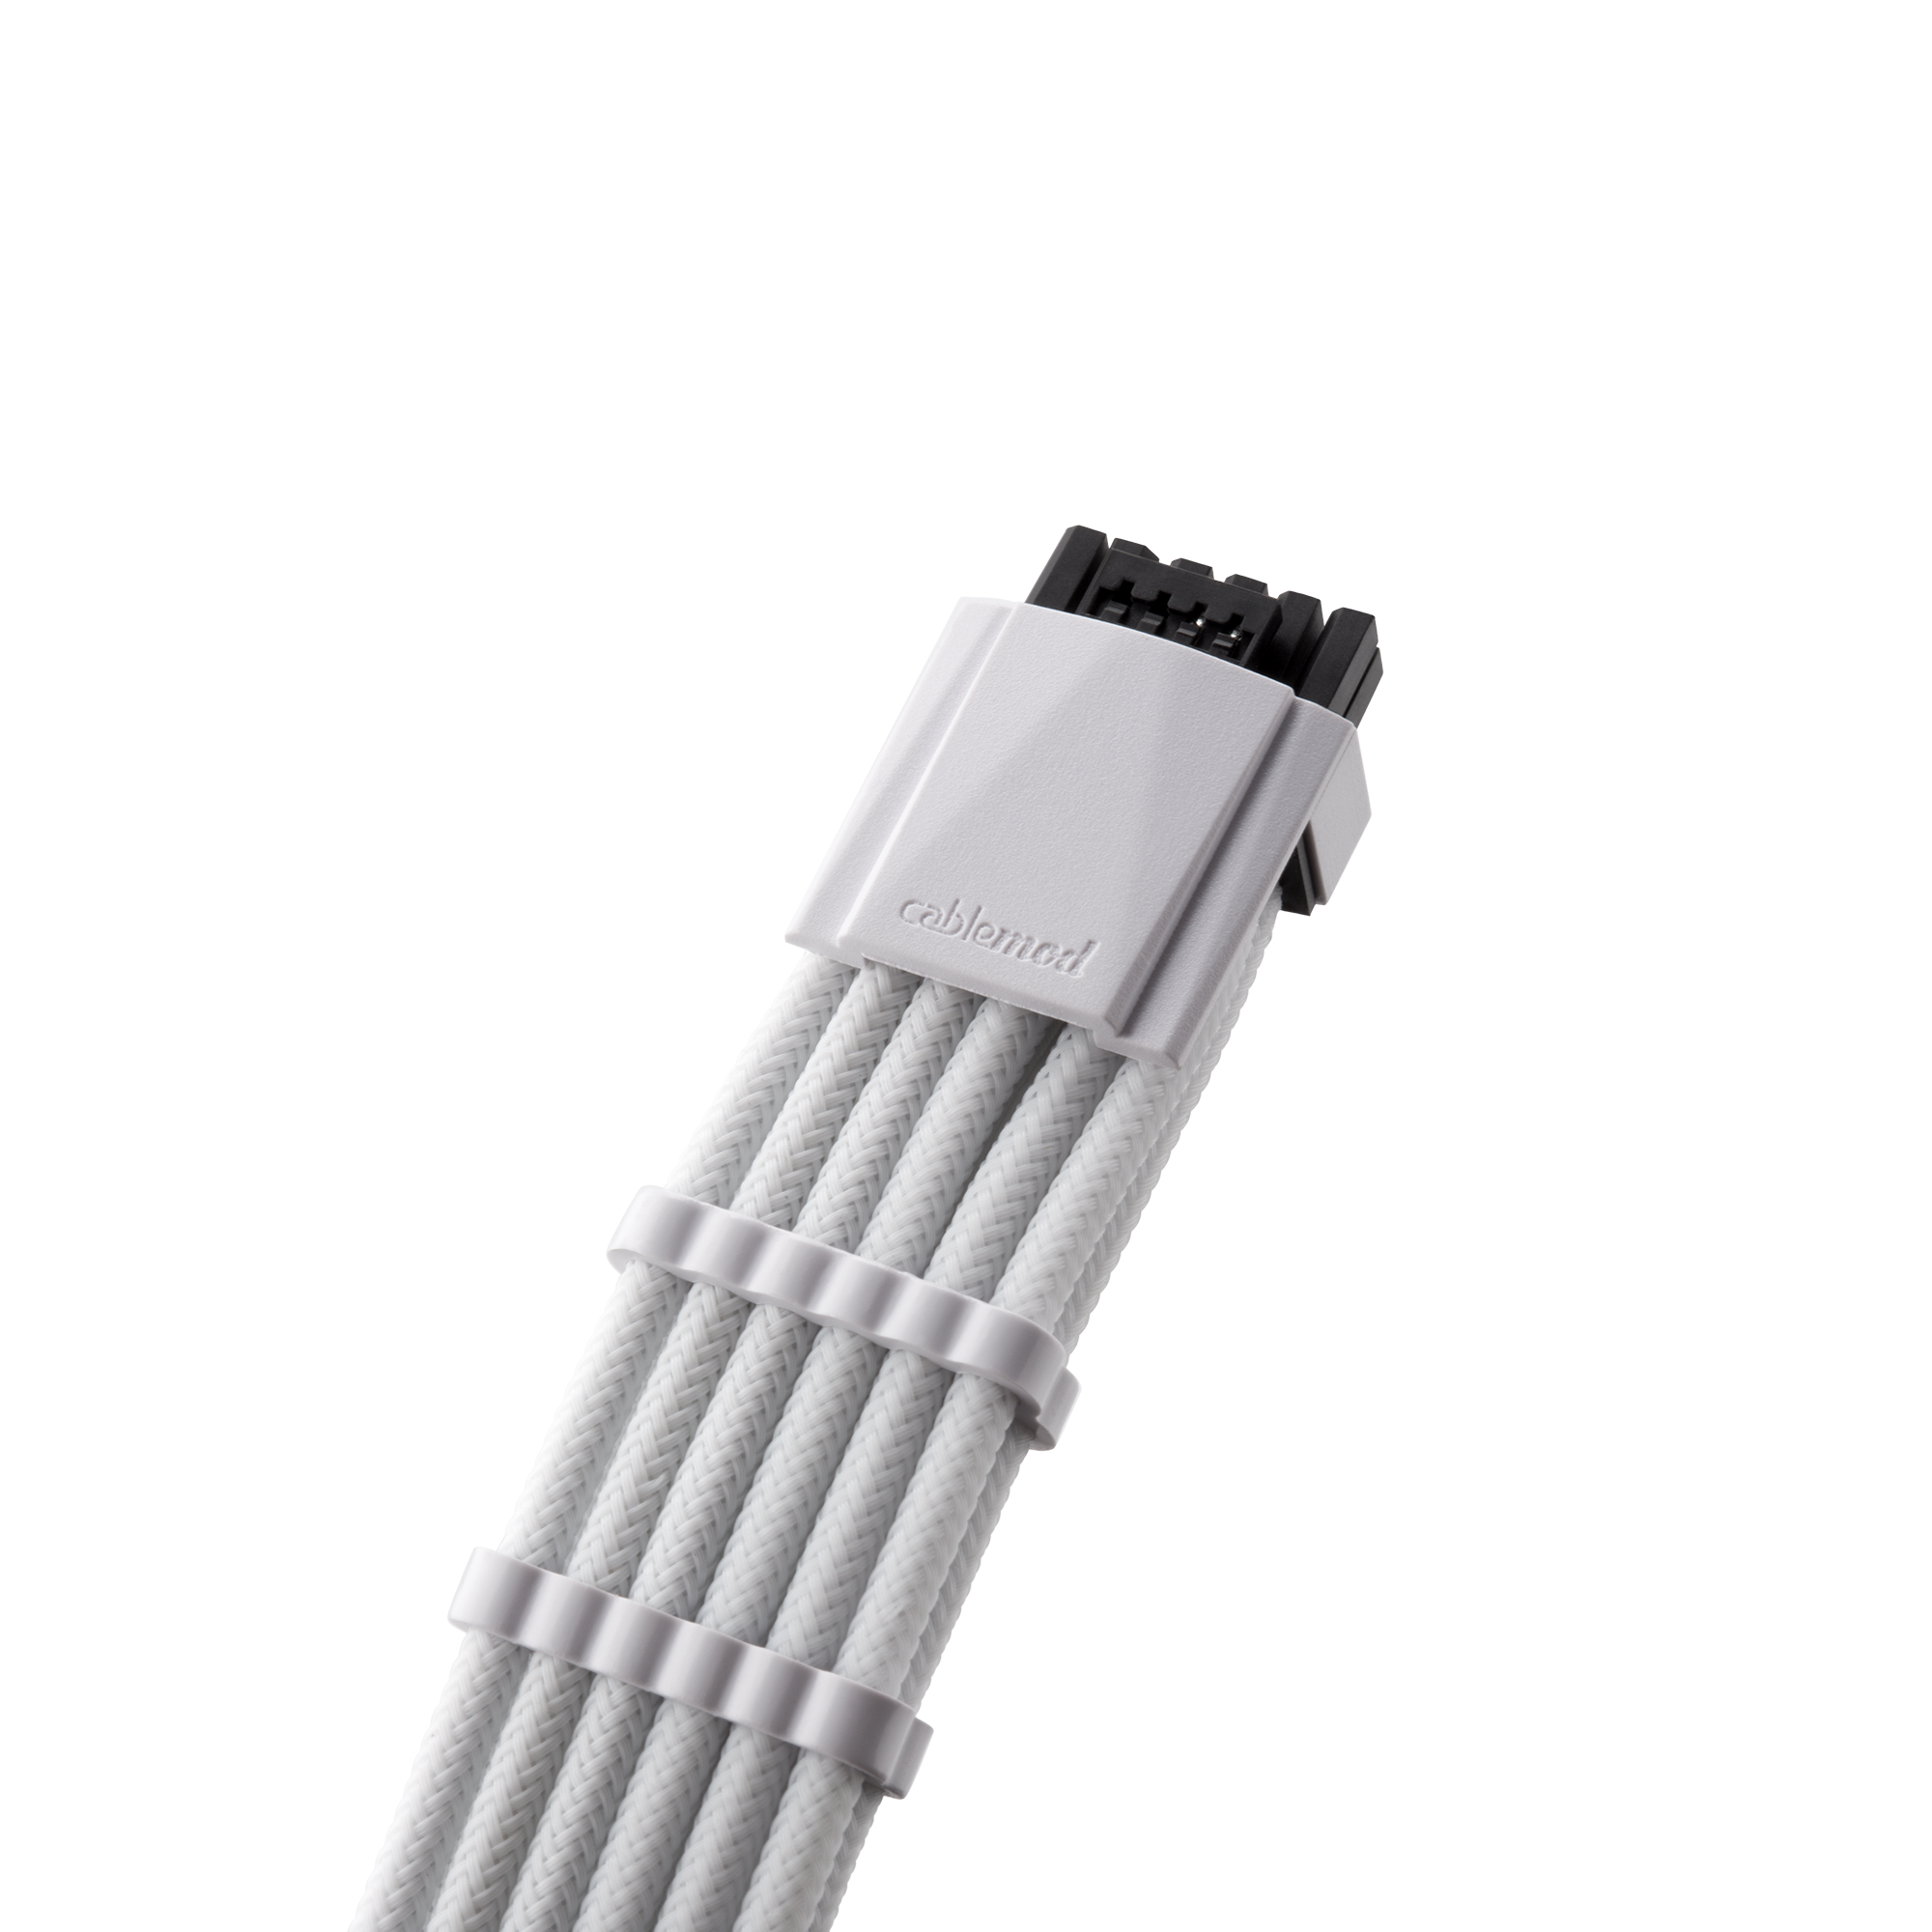 CableMod Pro ModMesh Sleeved Cable Extension Kit (White) 新作から